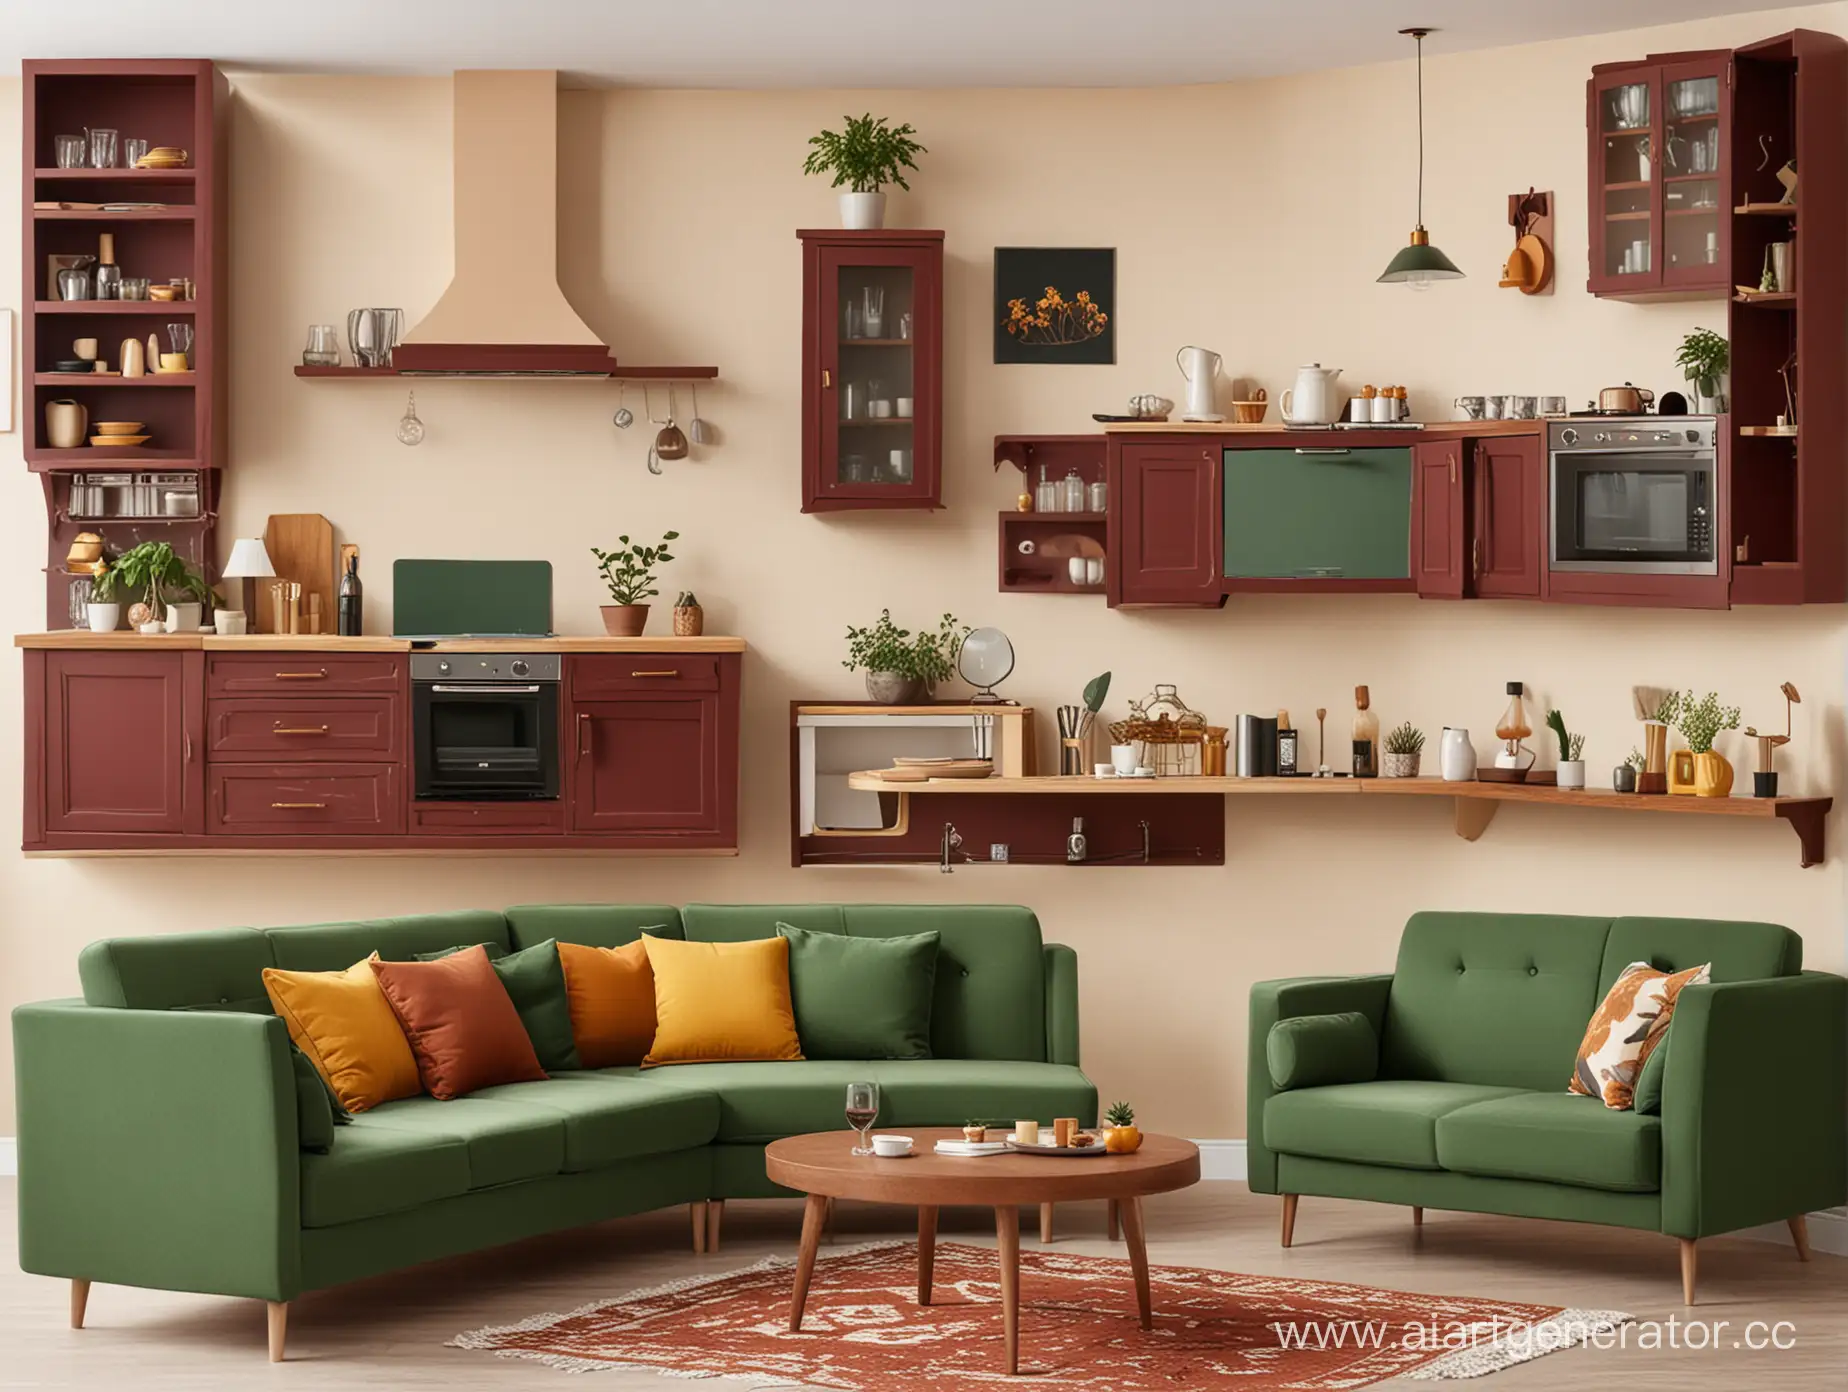 Cozy-Living-Room-and-Kitchen-Collage-in-Burgundy-Dark-Green-and-Ocher-Tones